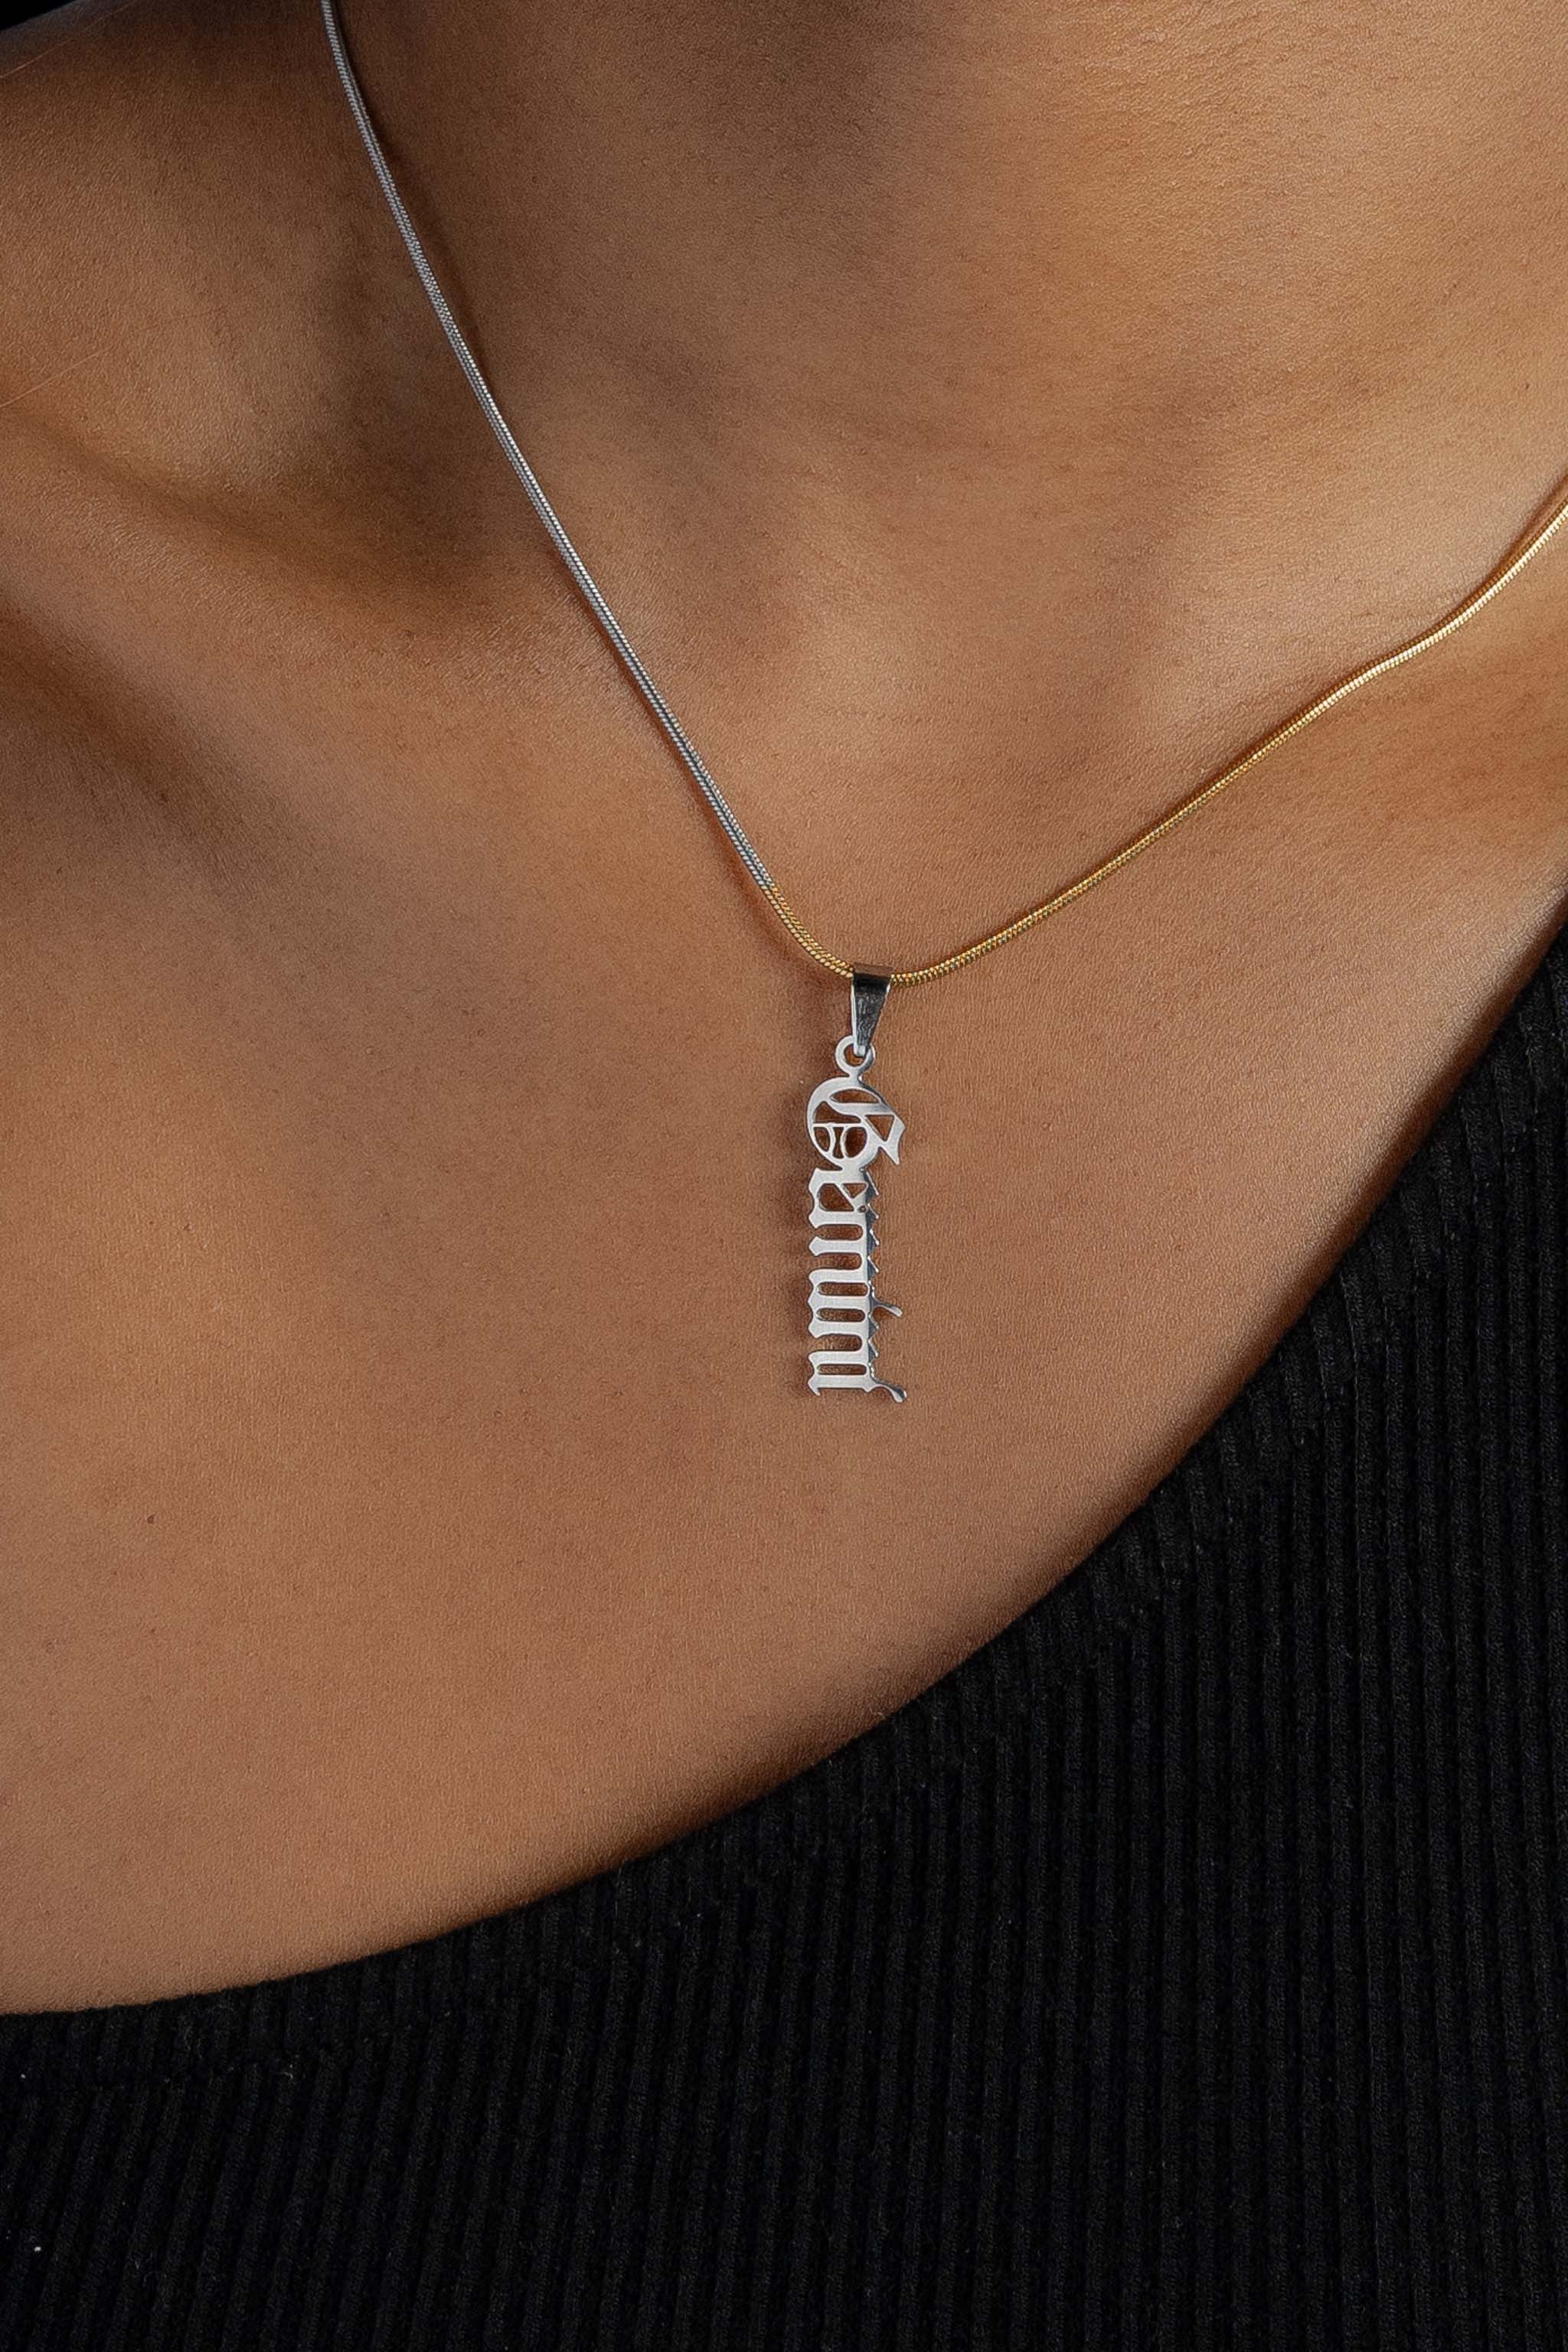 Zodiac Name Necklace with Mixed Metal Snake Chain